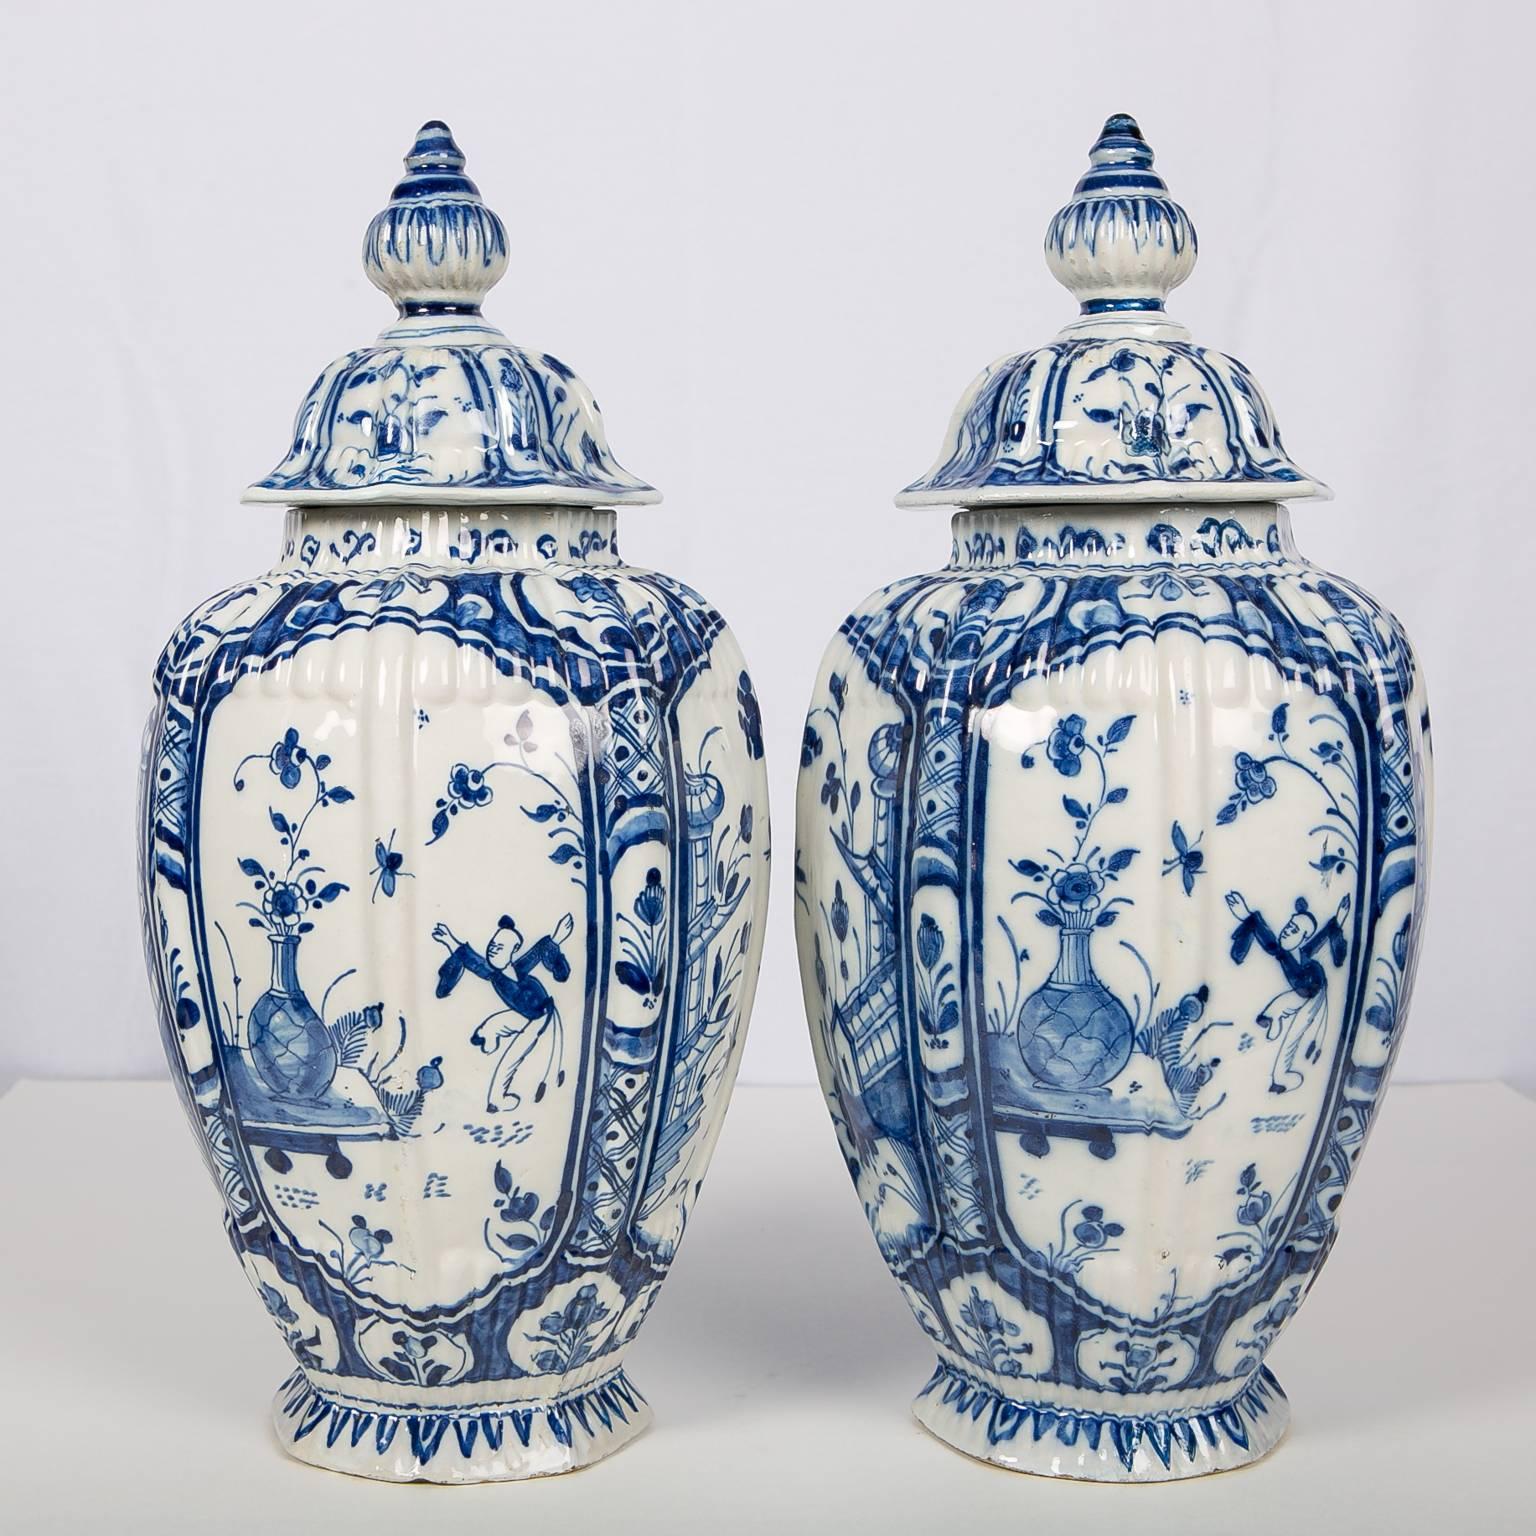 A pair of octagonal Dutch delft covered jars painted in a beautiful shade of cobalt blue. Made in the 18th century, circa 1770, the jars have hand-painted panels with delicate chinoiserie decoration. The covers are topped by traditional lotus bud